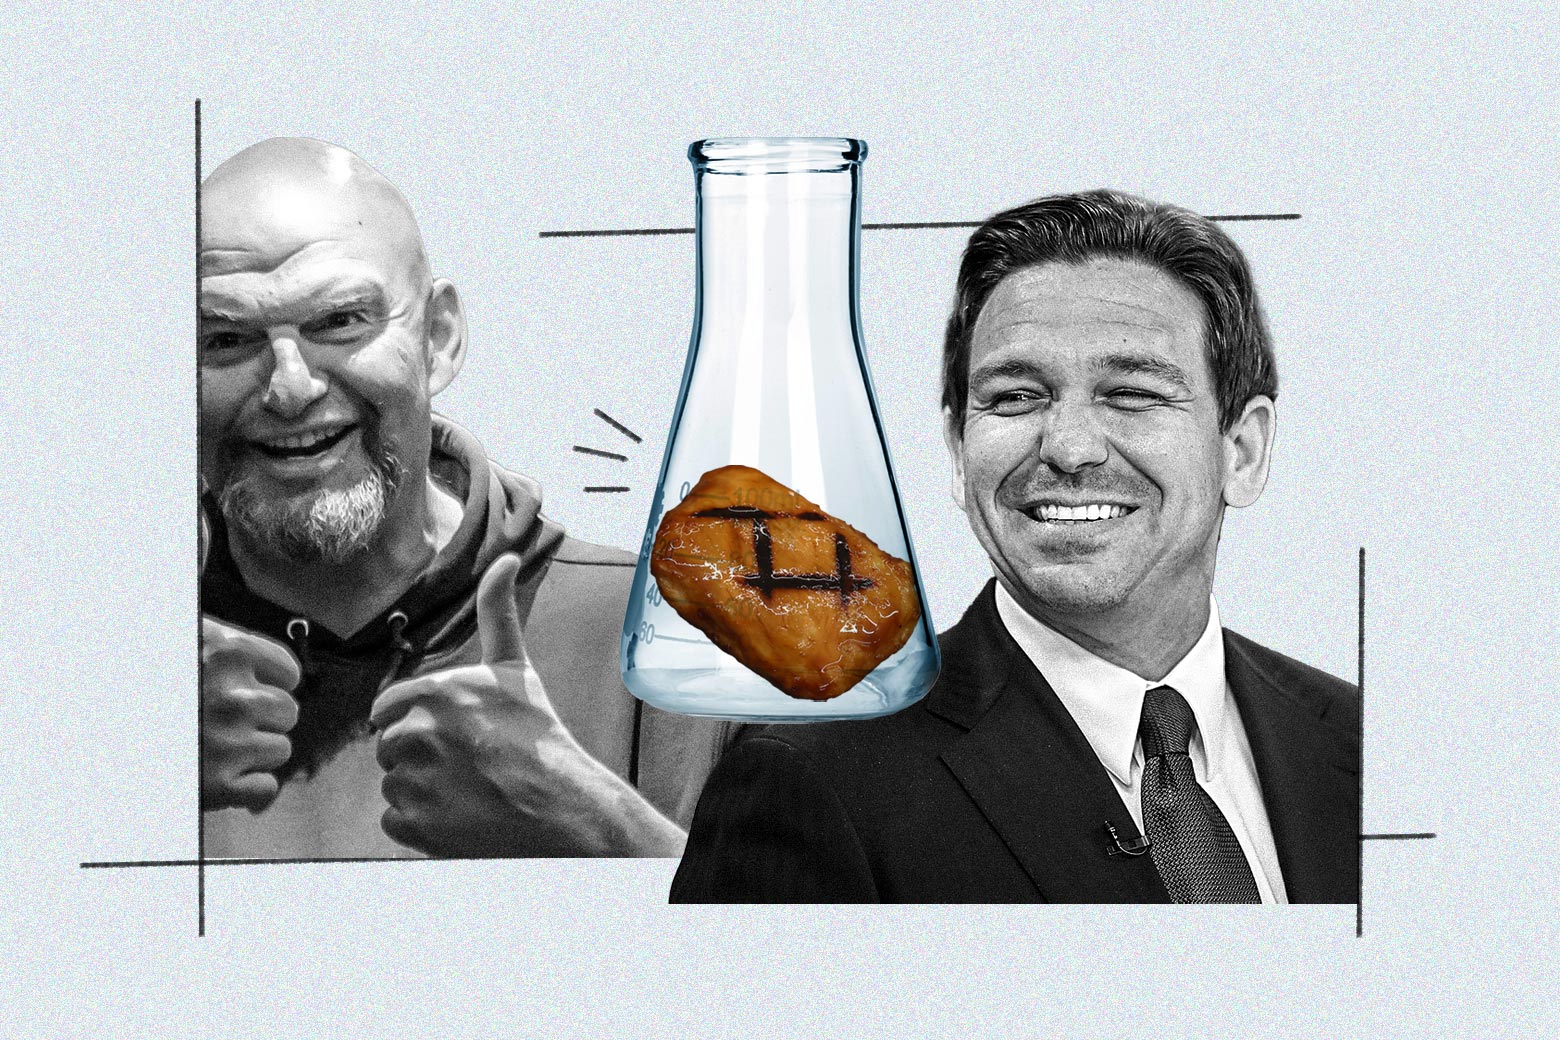 John Fetterman and Ron DeSantis smile congenially, while a beaker filled with lab-grown meat sits between them.